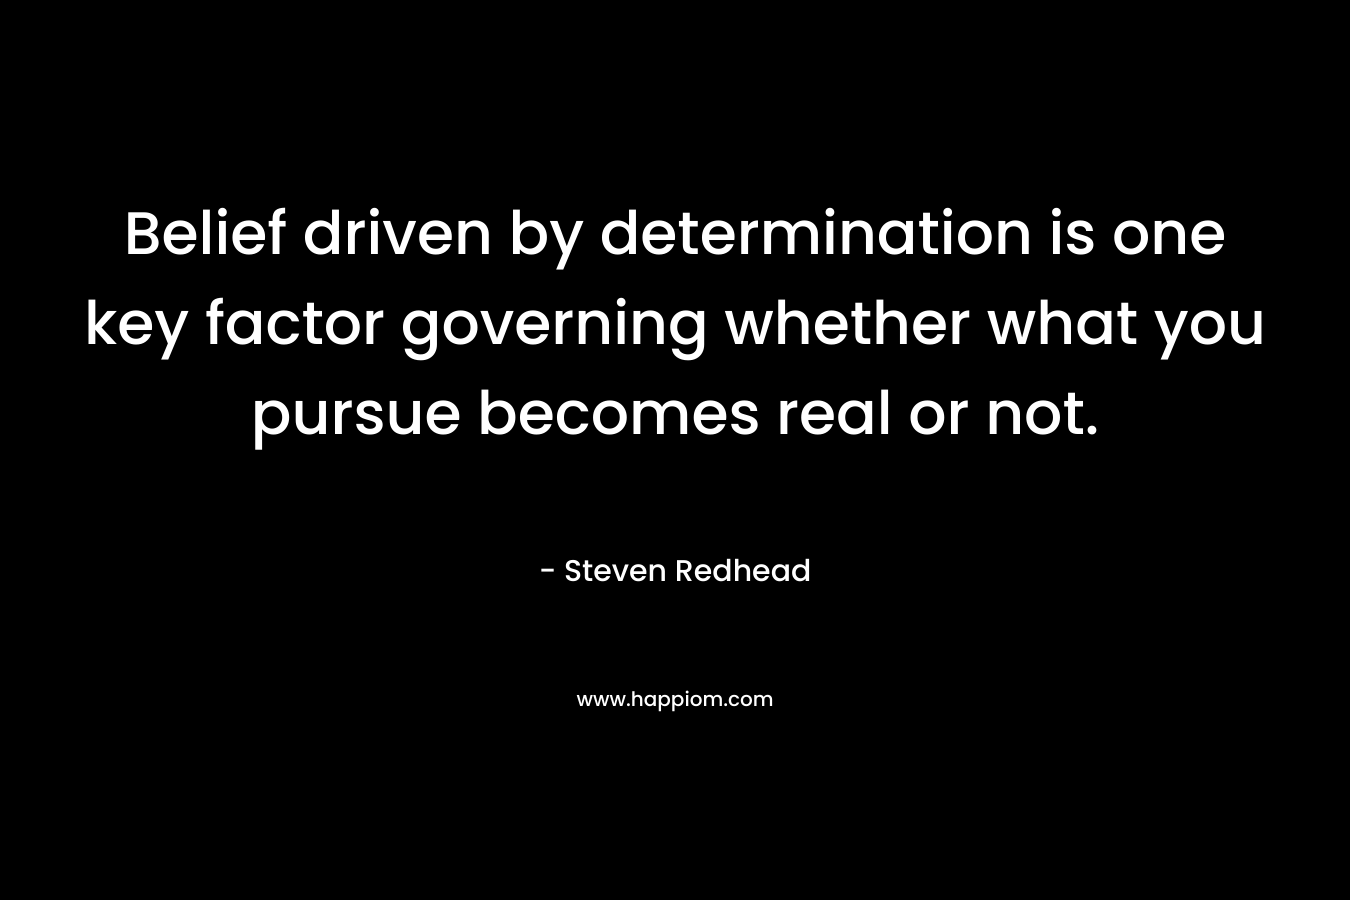 Belief driven by determination is one key factor governing whether what you pursue becomes real or not. – Steven Redhead